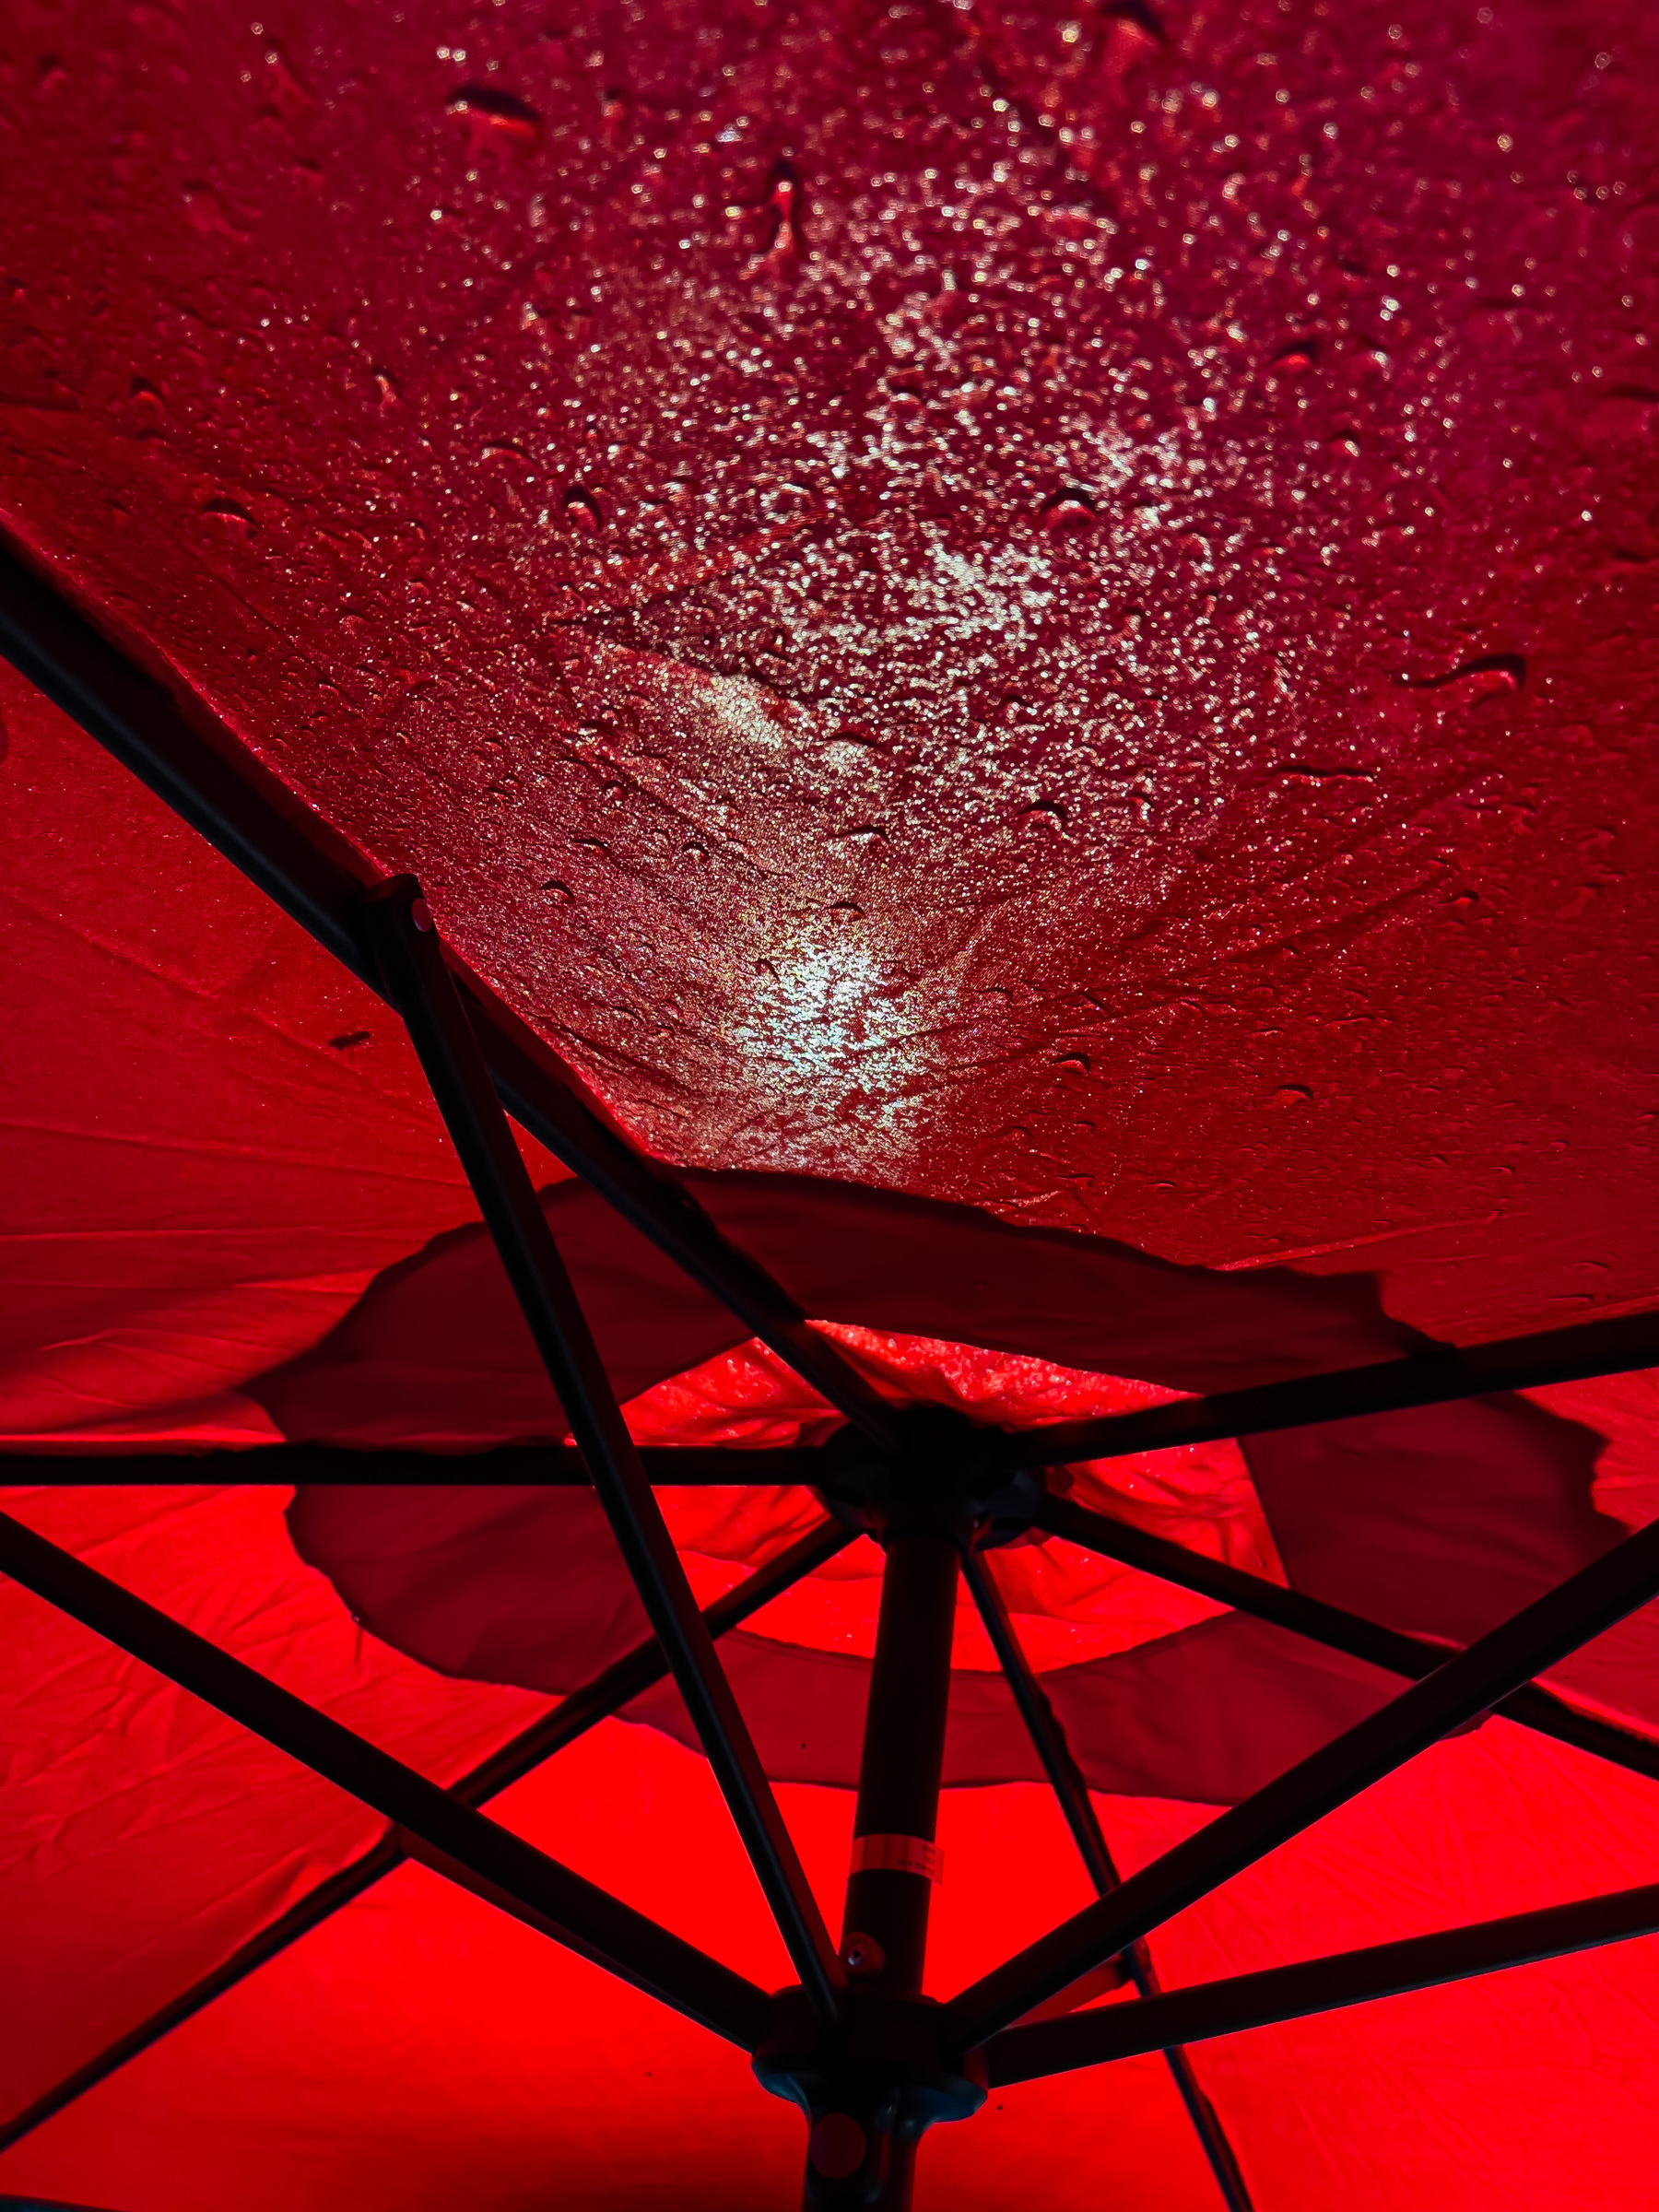 Underside of red umbrella with streetlights shining through at top of frame revealing water droplets sitting on top.